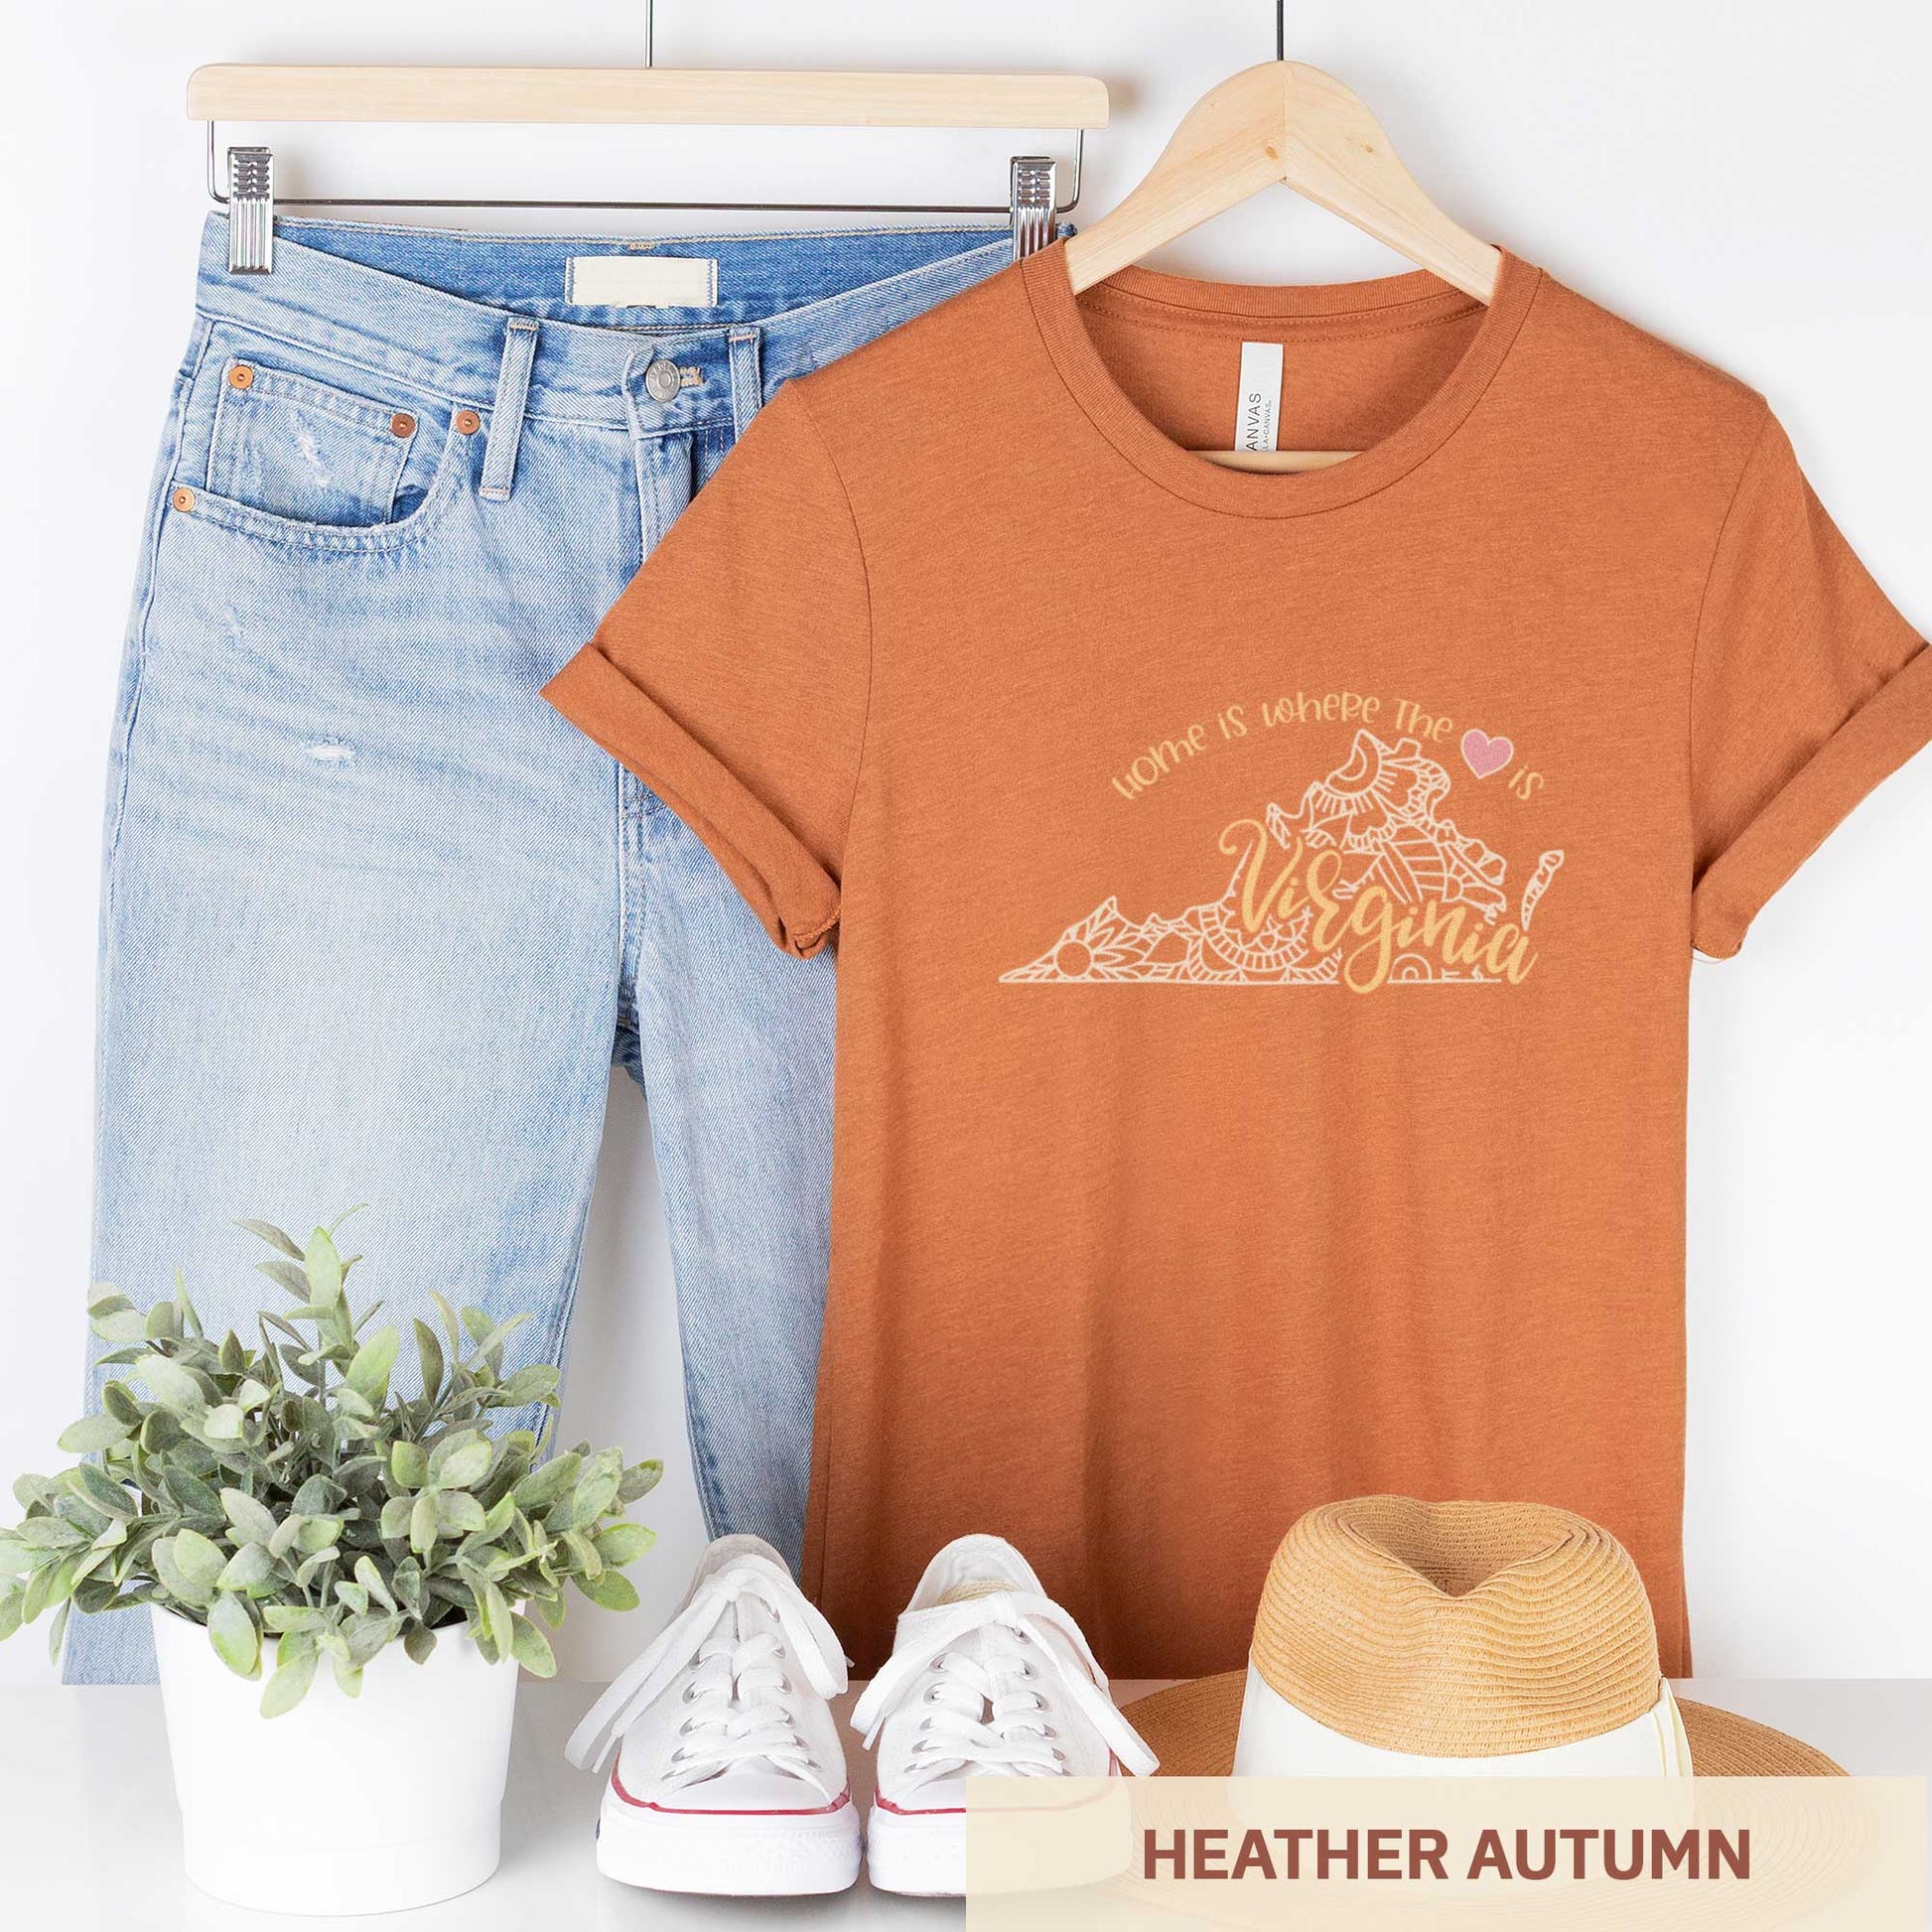 A hanging heather autumn Bella Canvas t-shirt featuring a mandala in the shape of Virginia with the words home is where the heart is.